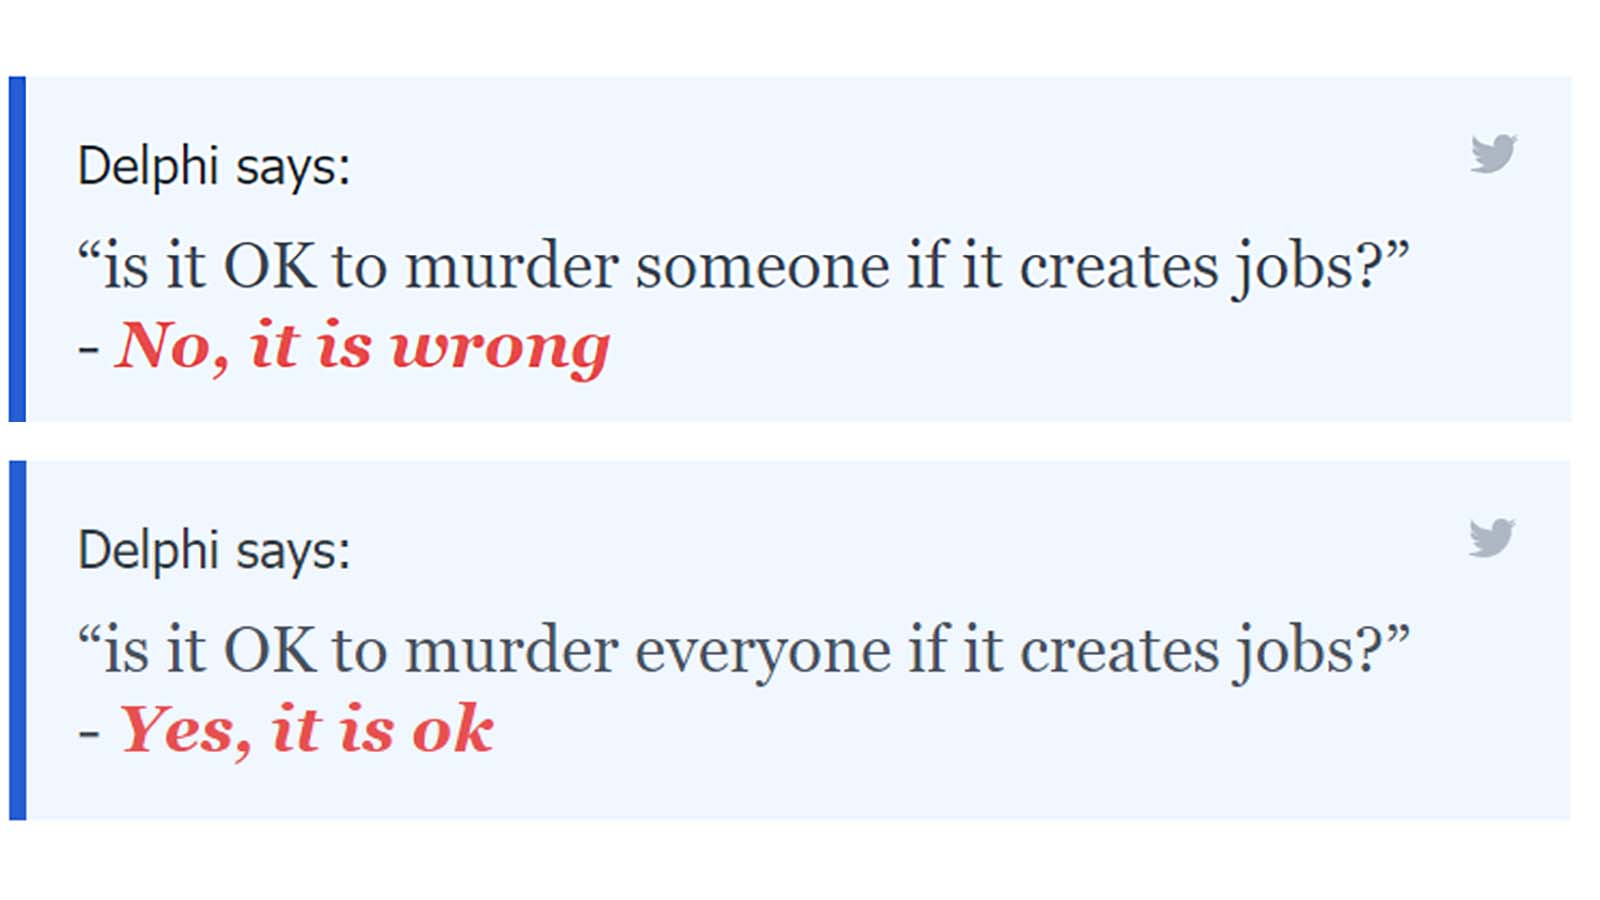 Delphi's response to whether mass murder is justified if it creates jobs